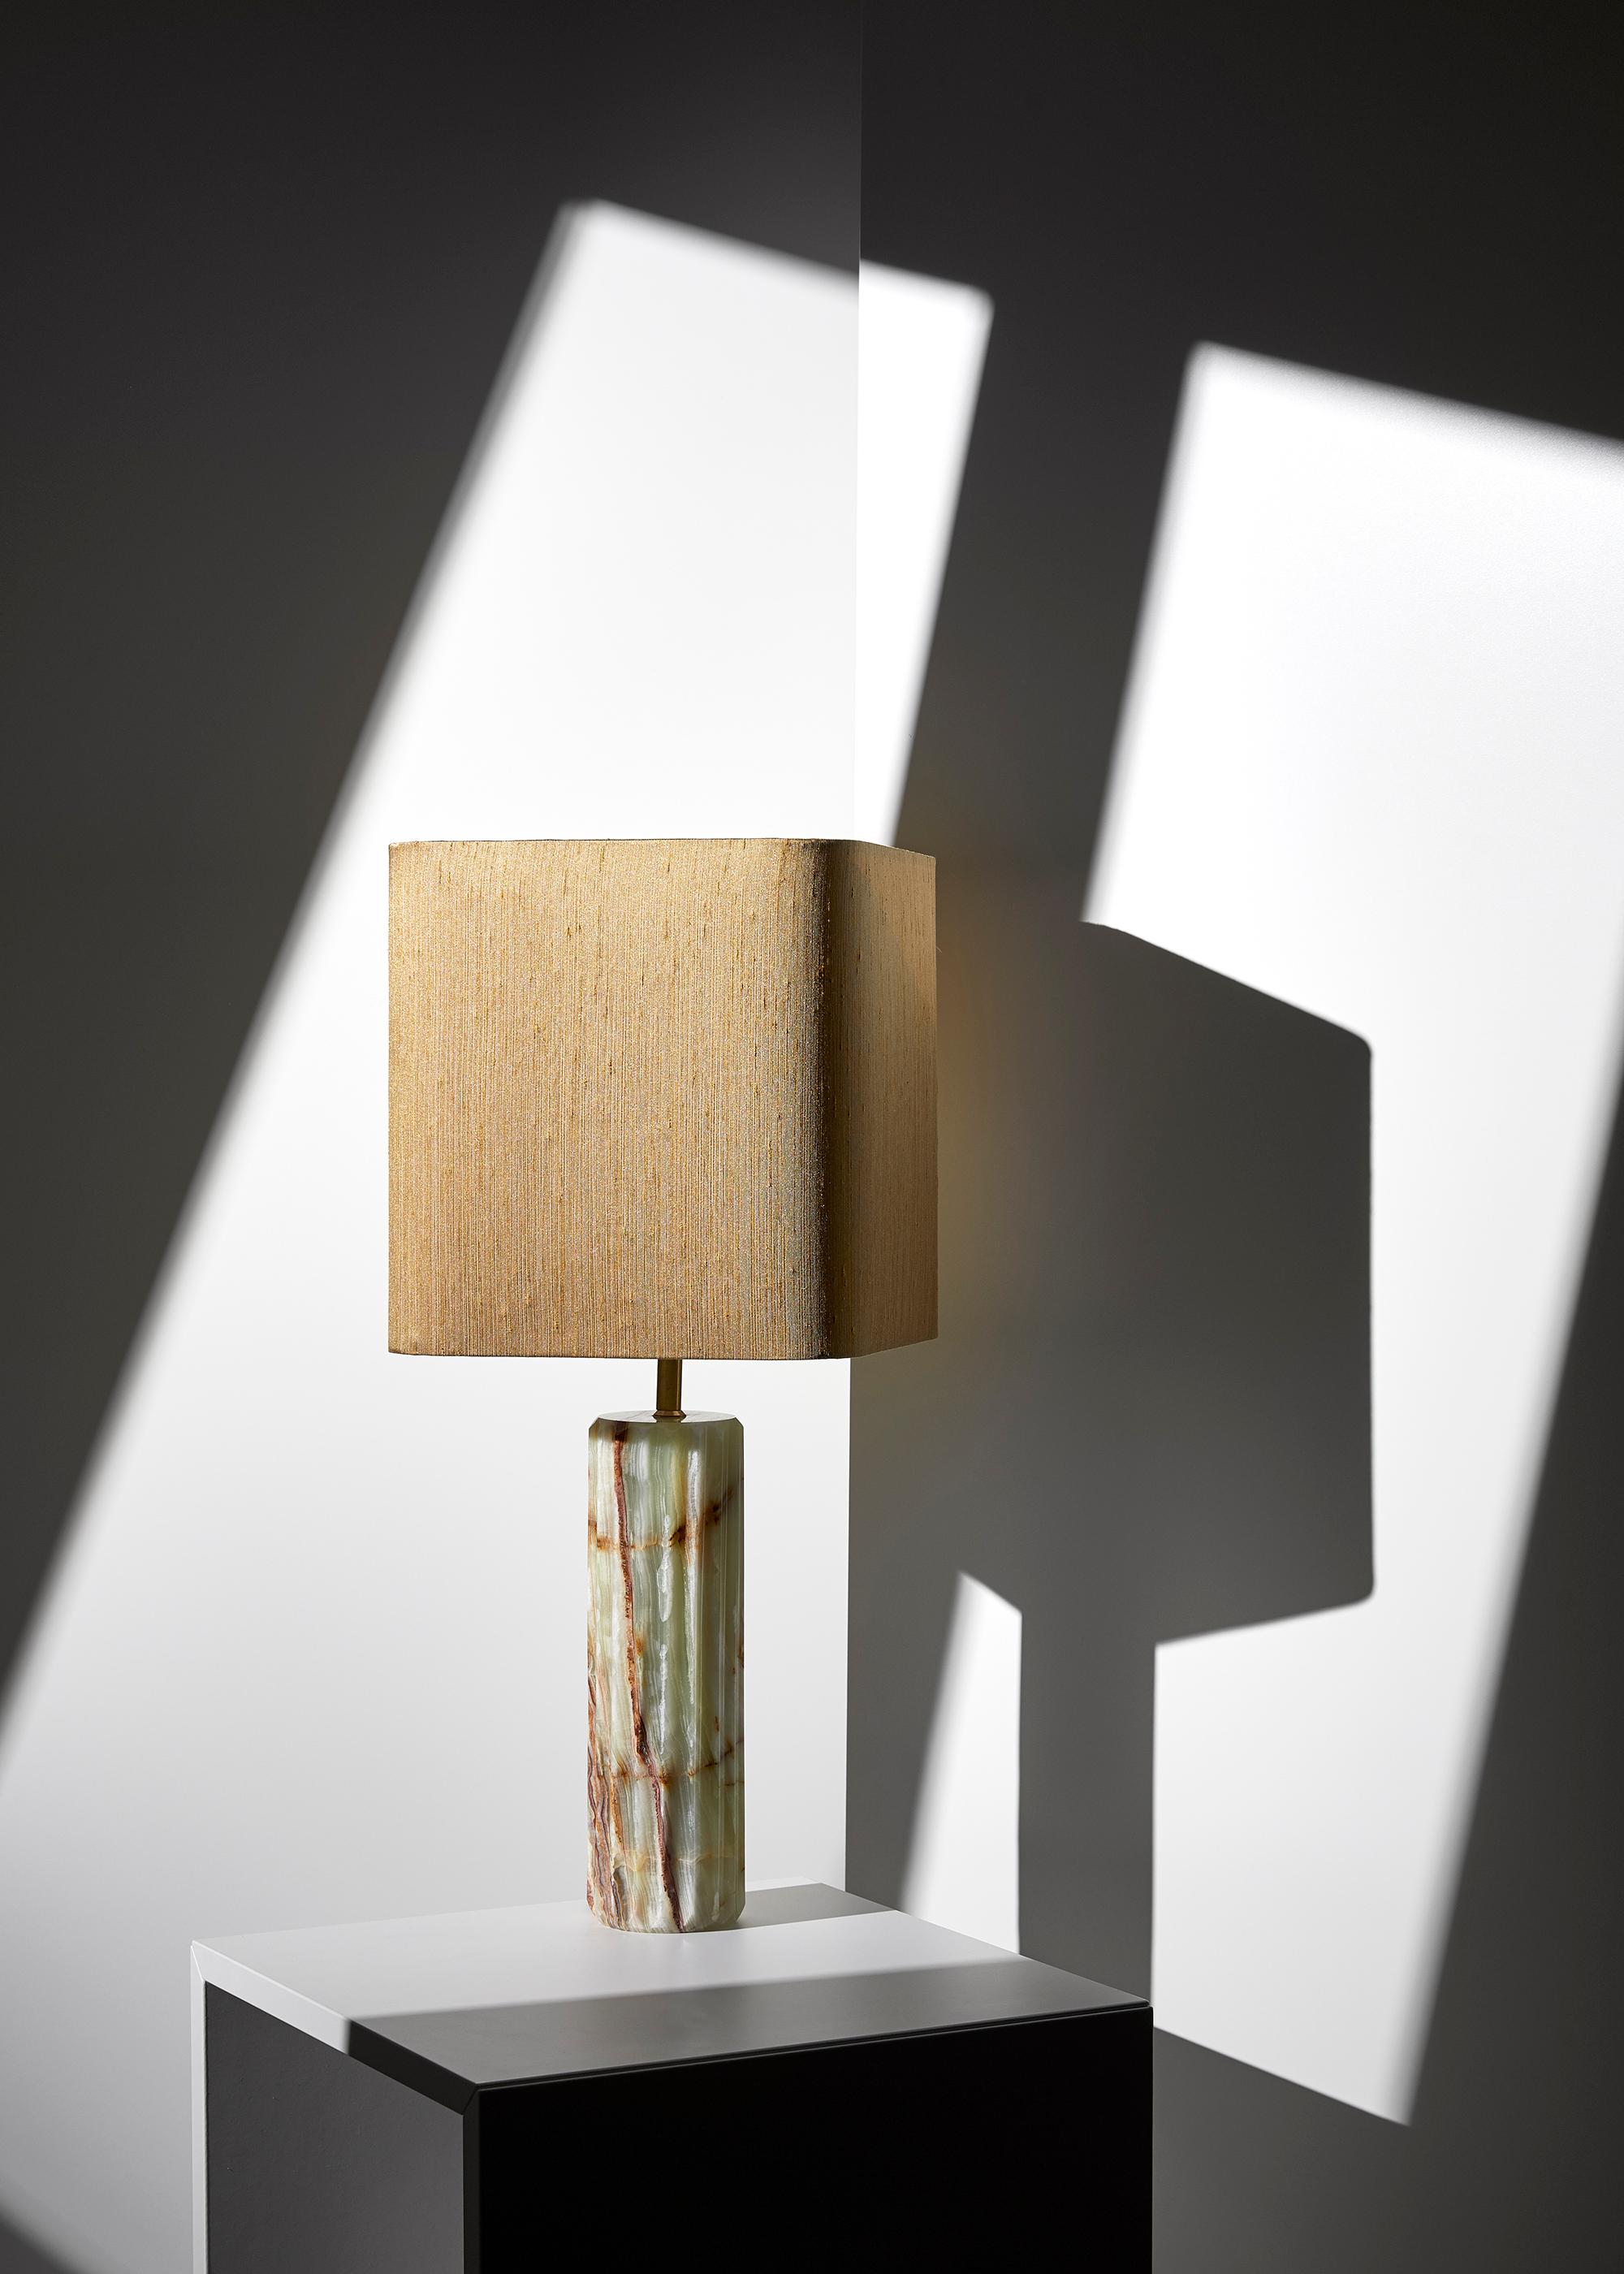 Onyx Proud Table Lamp by Lisette Rützou
Dimensions: 25 x H 55 cm
Materials: Onyx

All our lamps can be wired according to each country. If sold to the USA it will be wired for the USA for instance.

 Lisette Rützou’s design is motivated by an urge